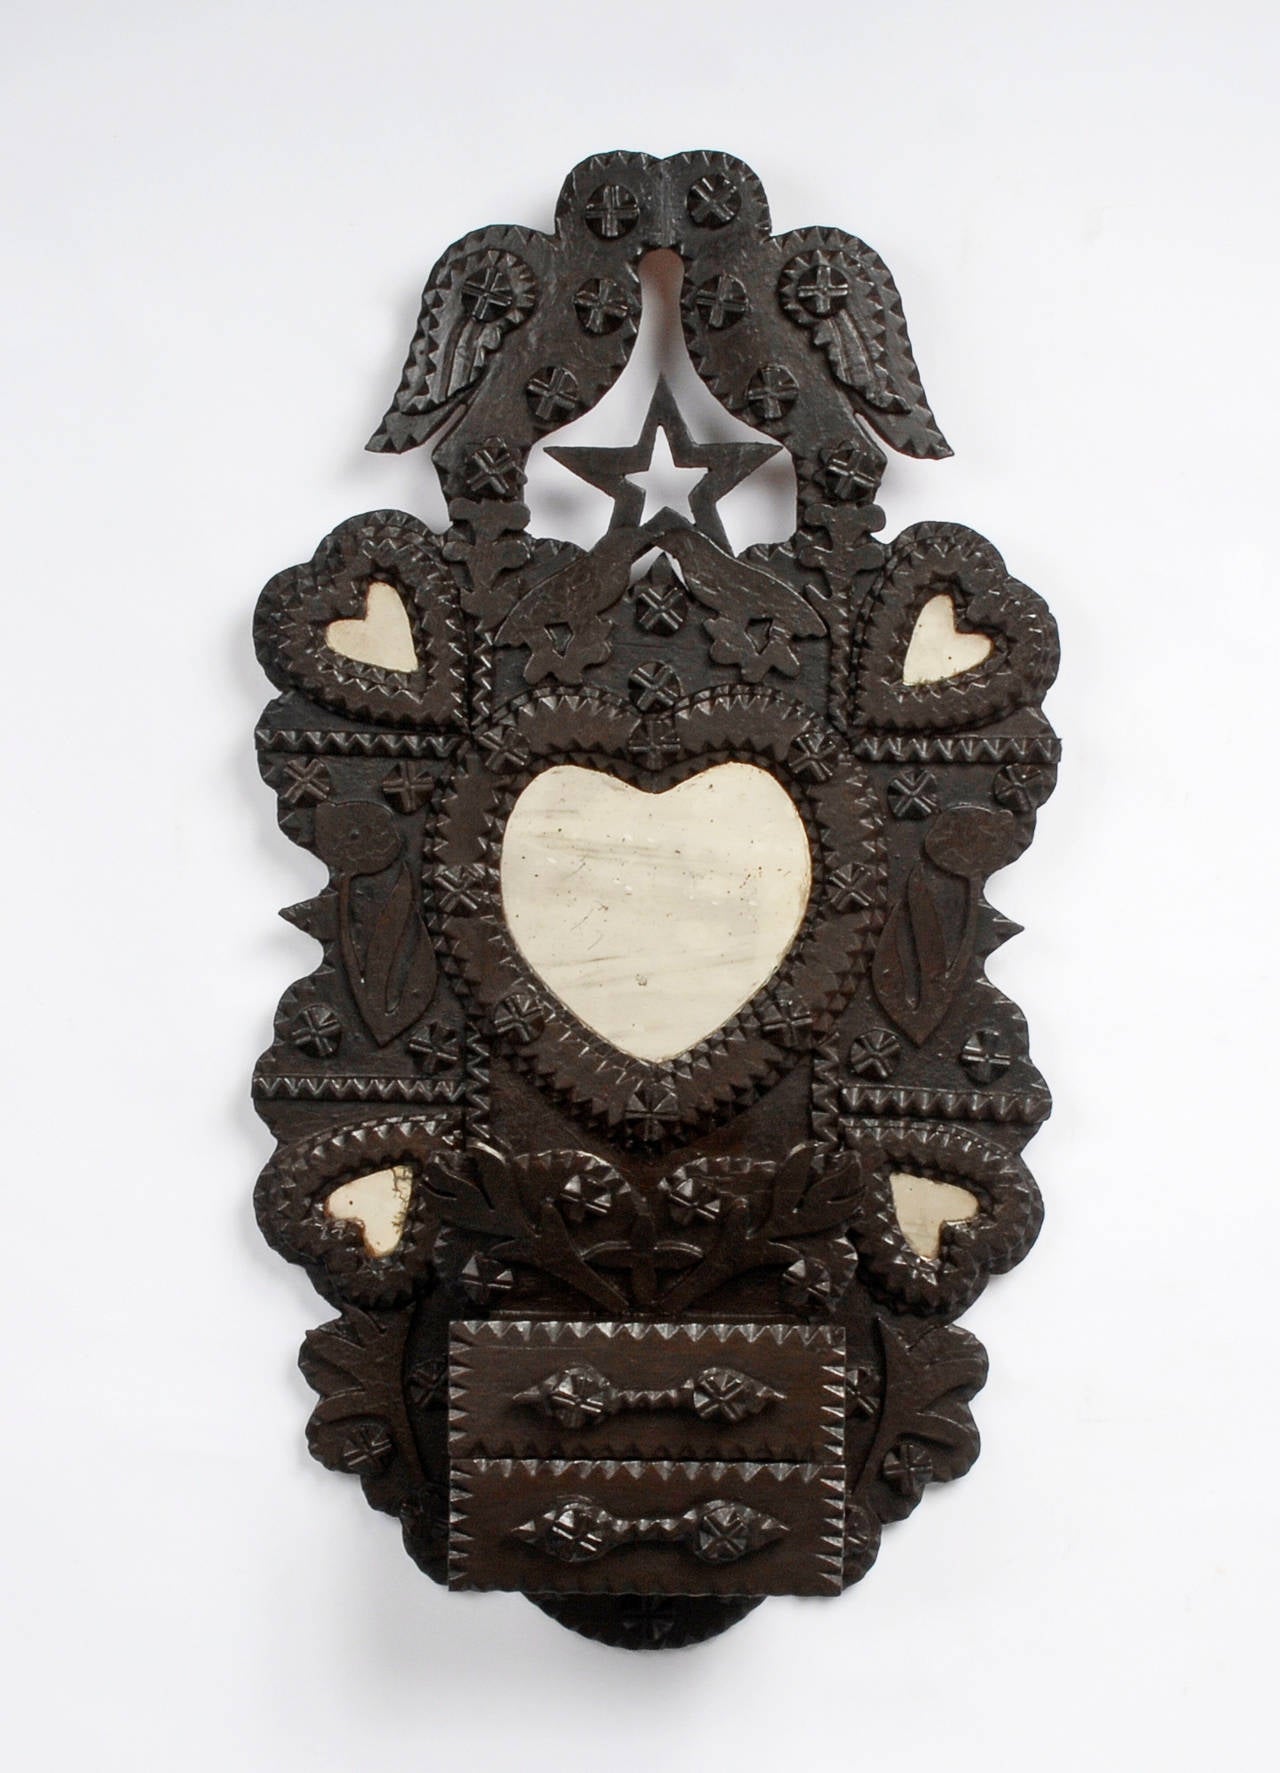 A superb Tramp Art ‘Kissing Doves’ wall sculpture by John Zadzora. This example is one of his most elaborate featuring his signature style incorporating five heart shaped mirrors, two drawers and a small compartment. Additionally he used some rather